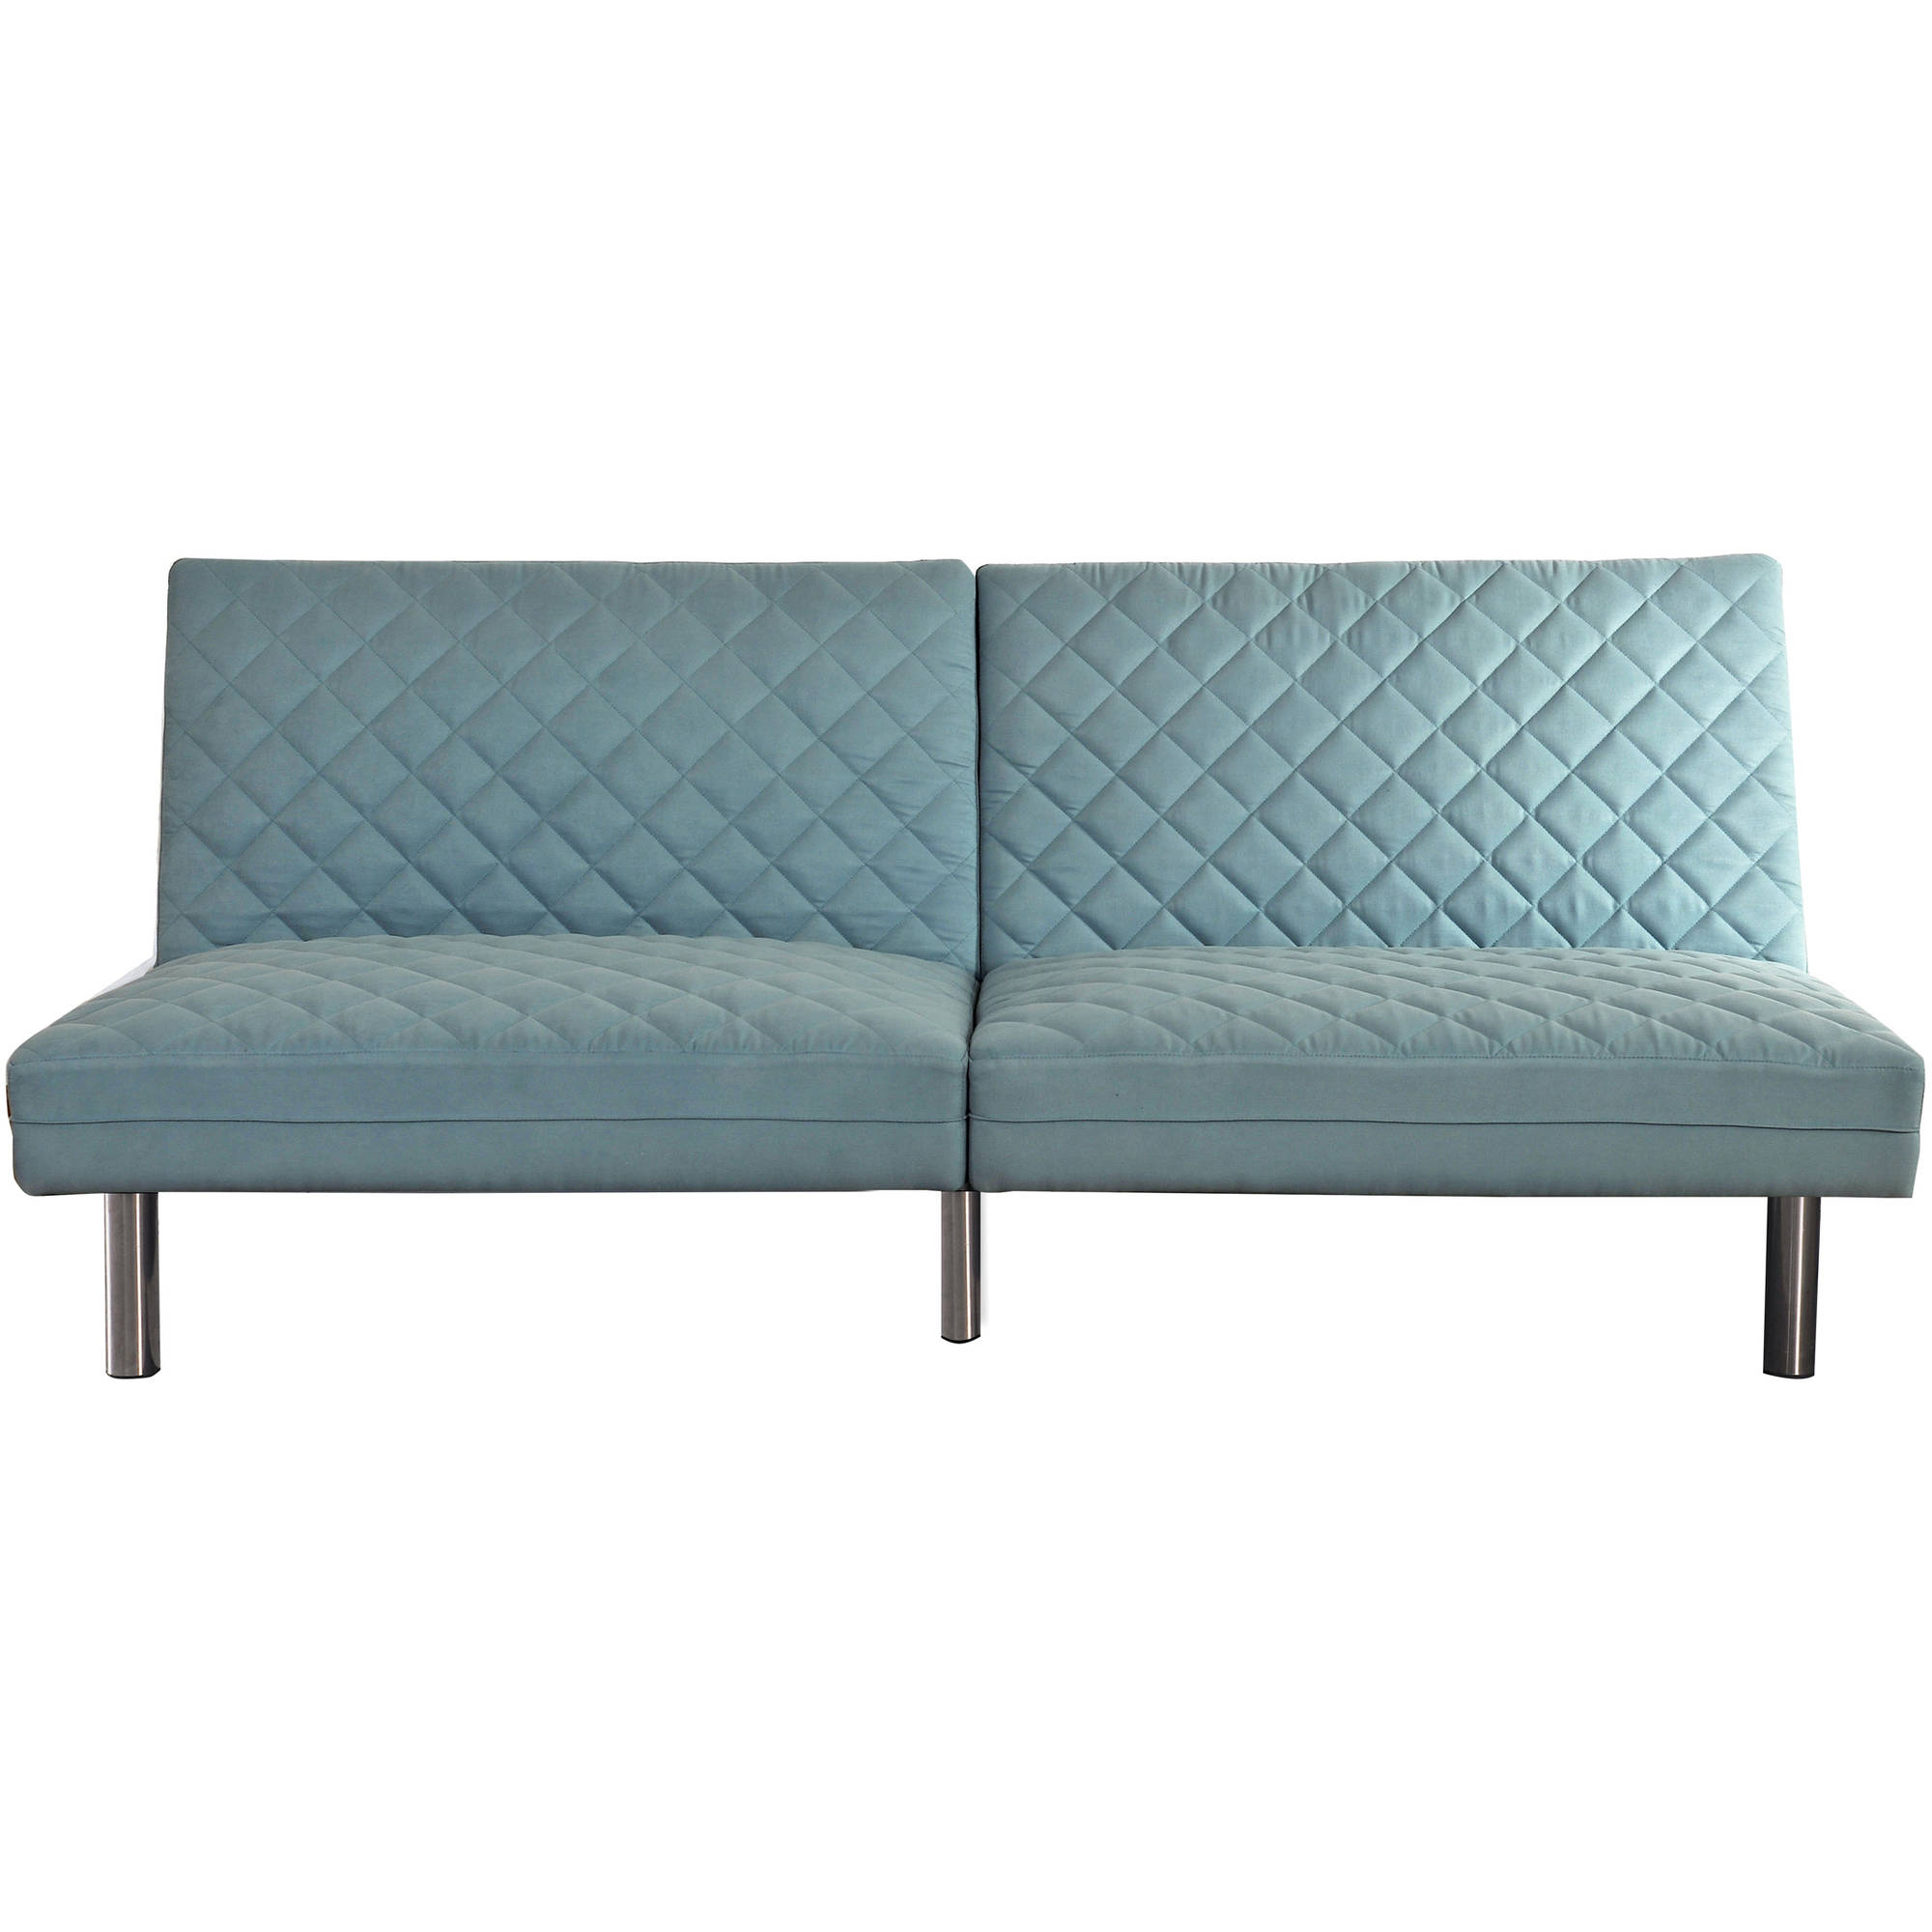 Mainstays Memory Foam Quilted Futon, Multiple Colors - image 1 of 3